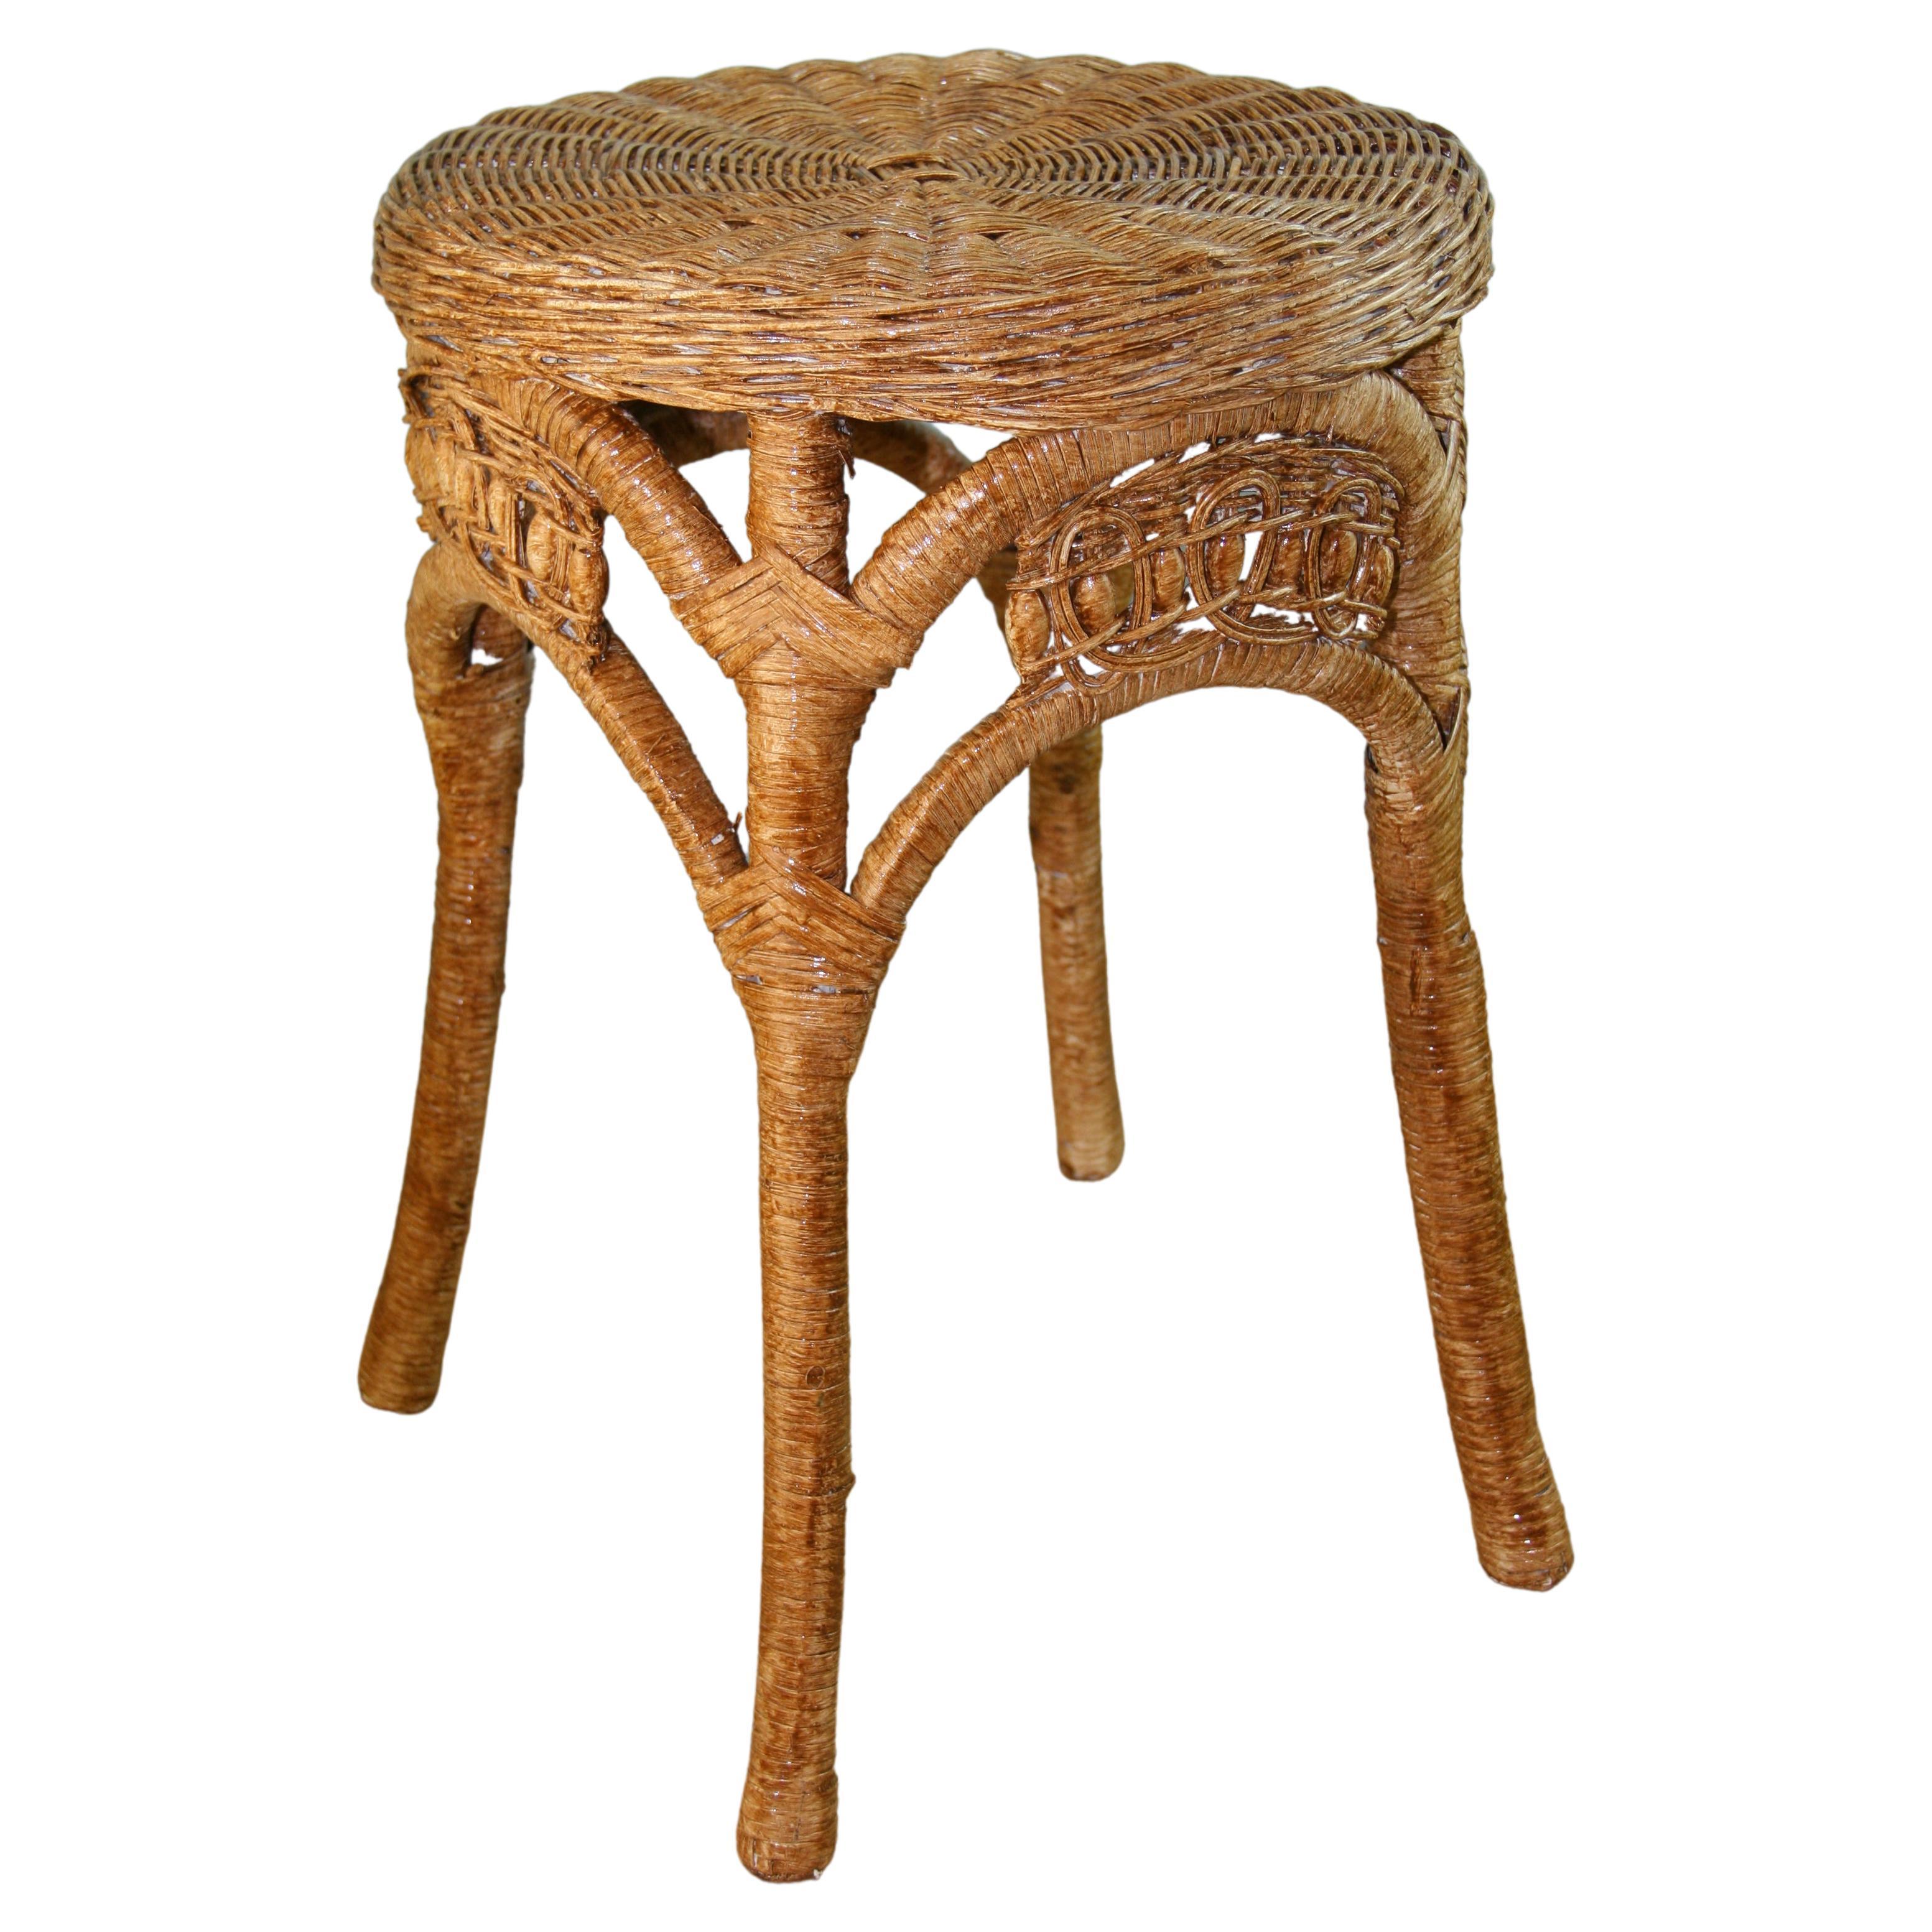 Wicker Stool/Plant Stand For Sale